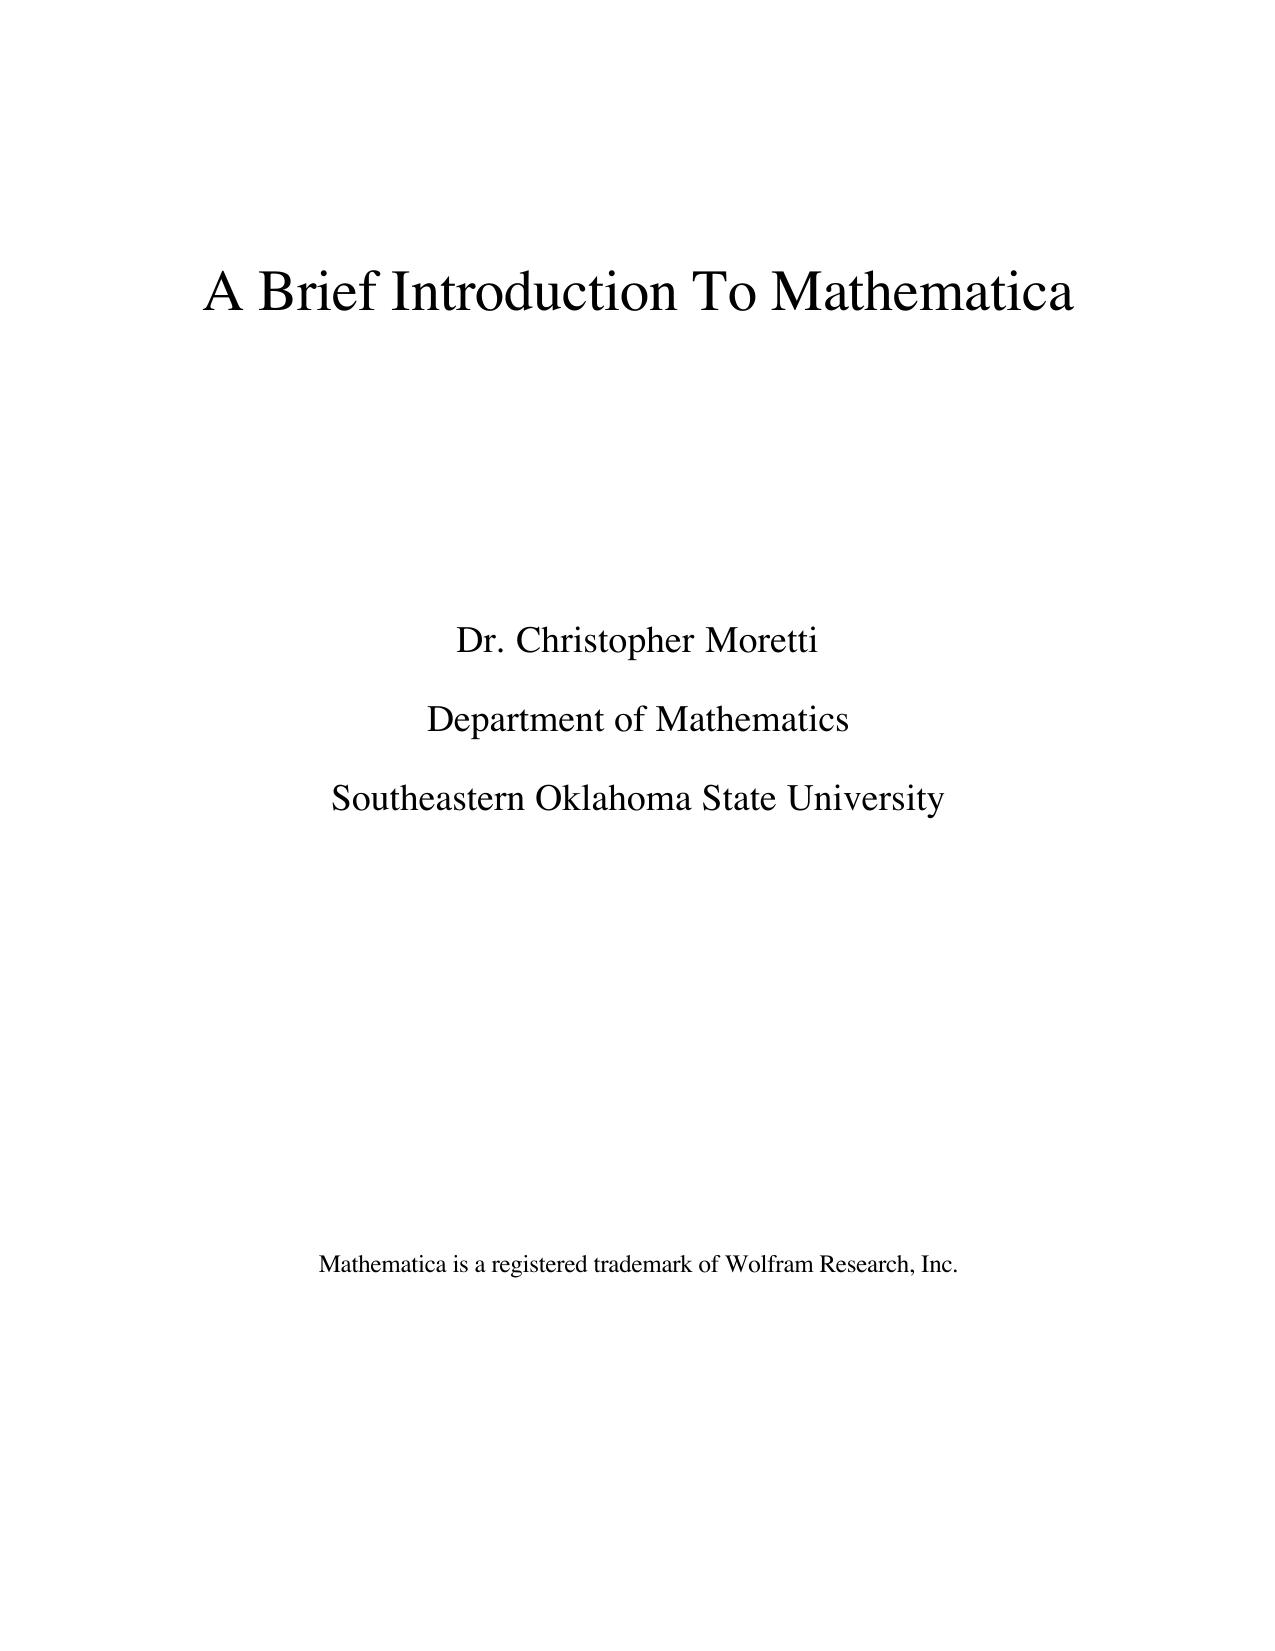 A Brief Introduction to Mathematica®